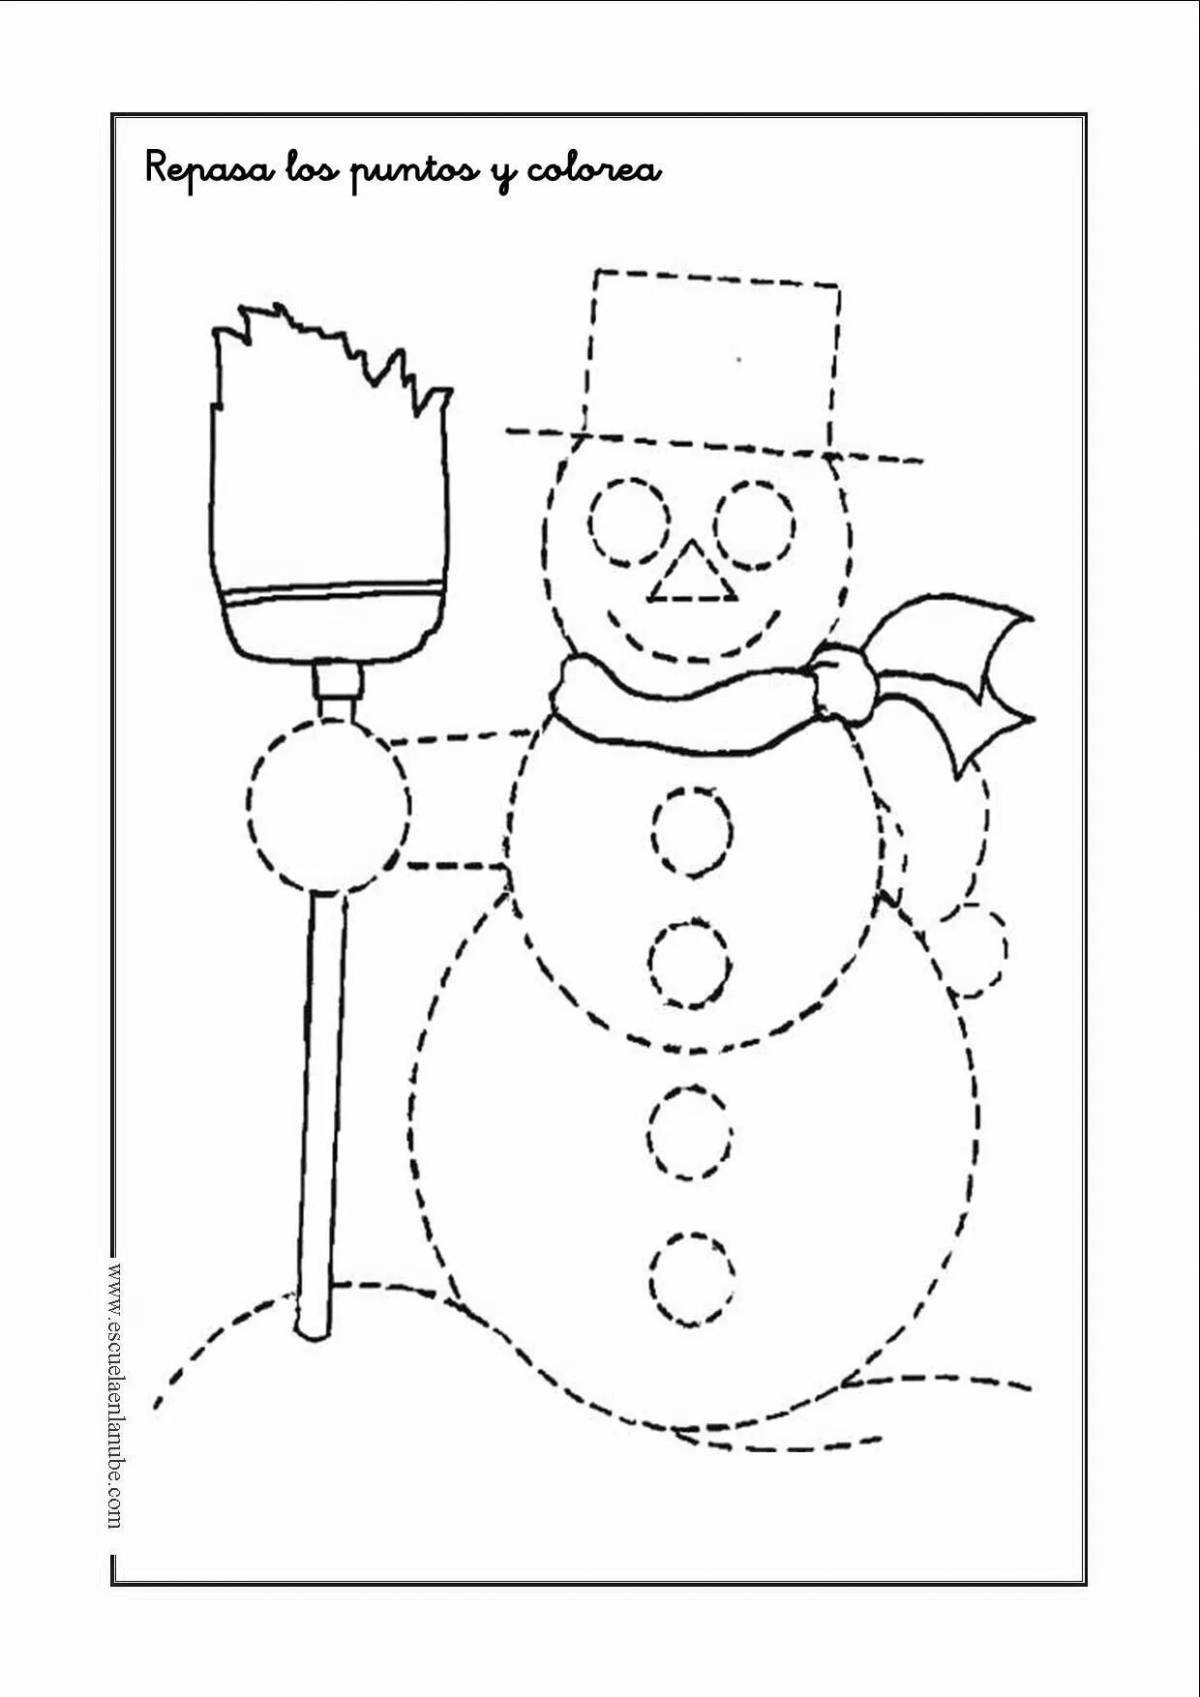 Snowman mask coloring page with rich colors